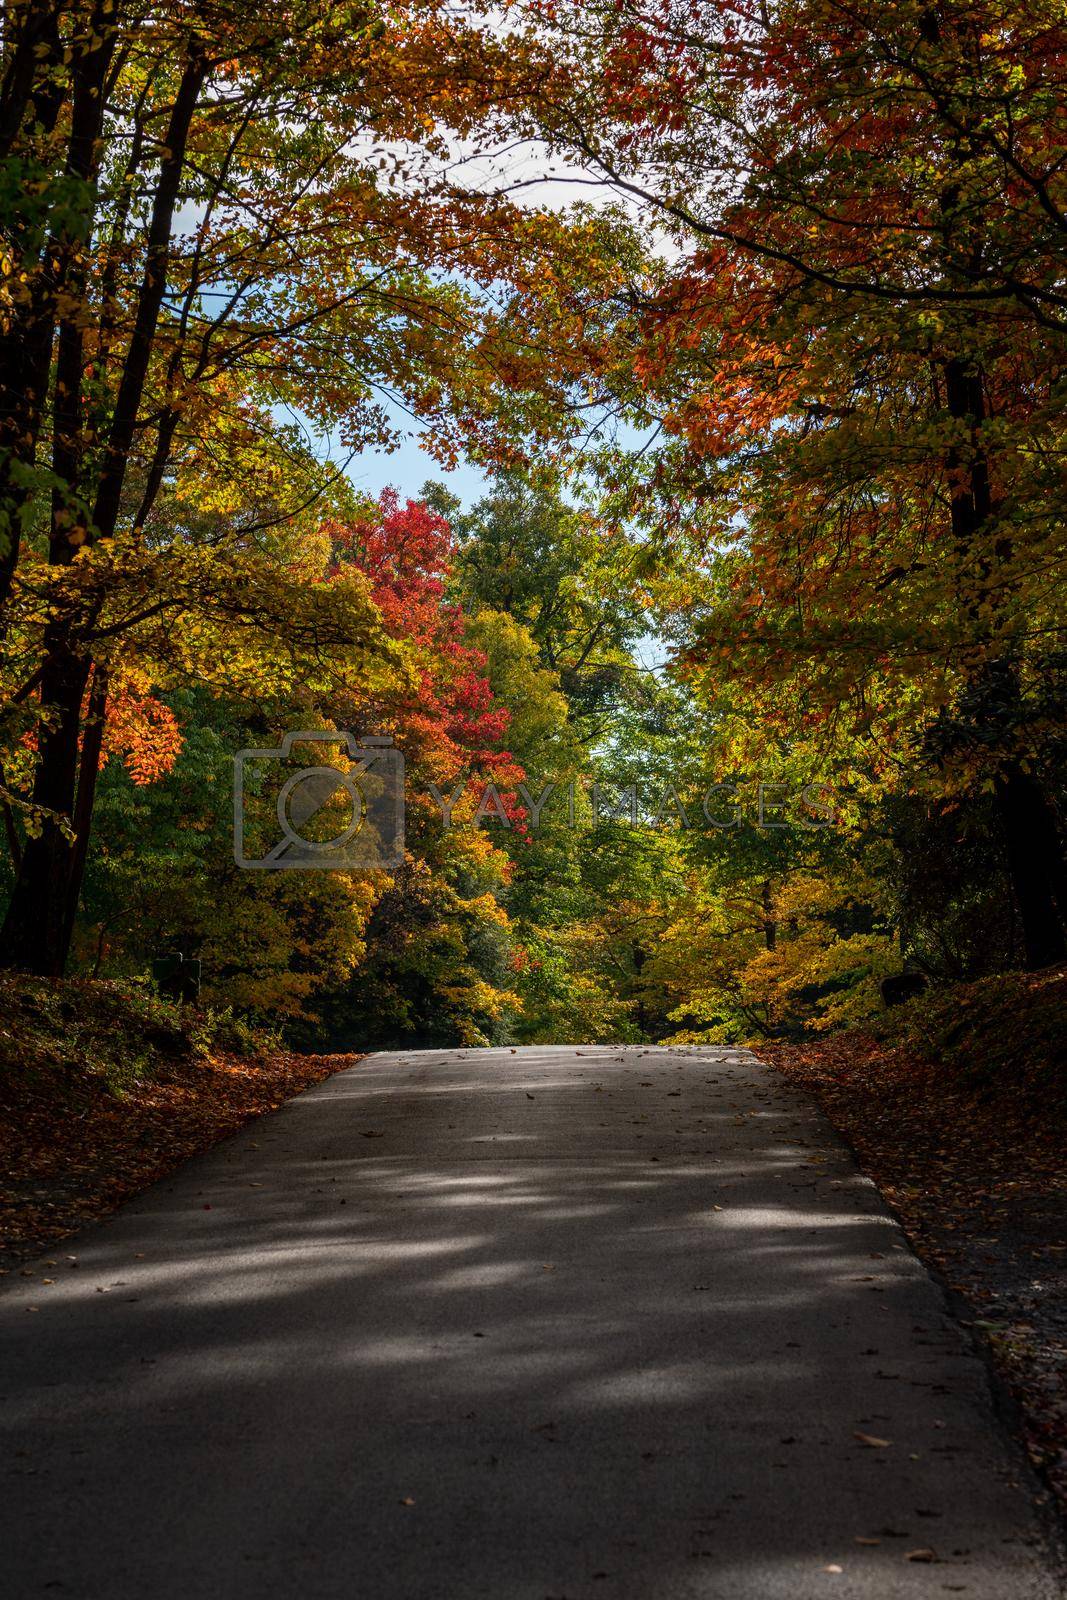 Royalty free image of Road in Coopers Rock state park in West Virginia with fall colors by steheap